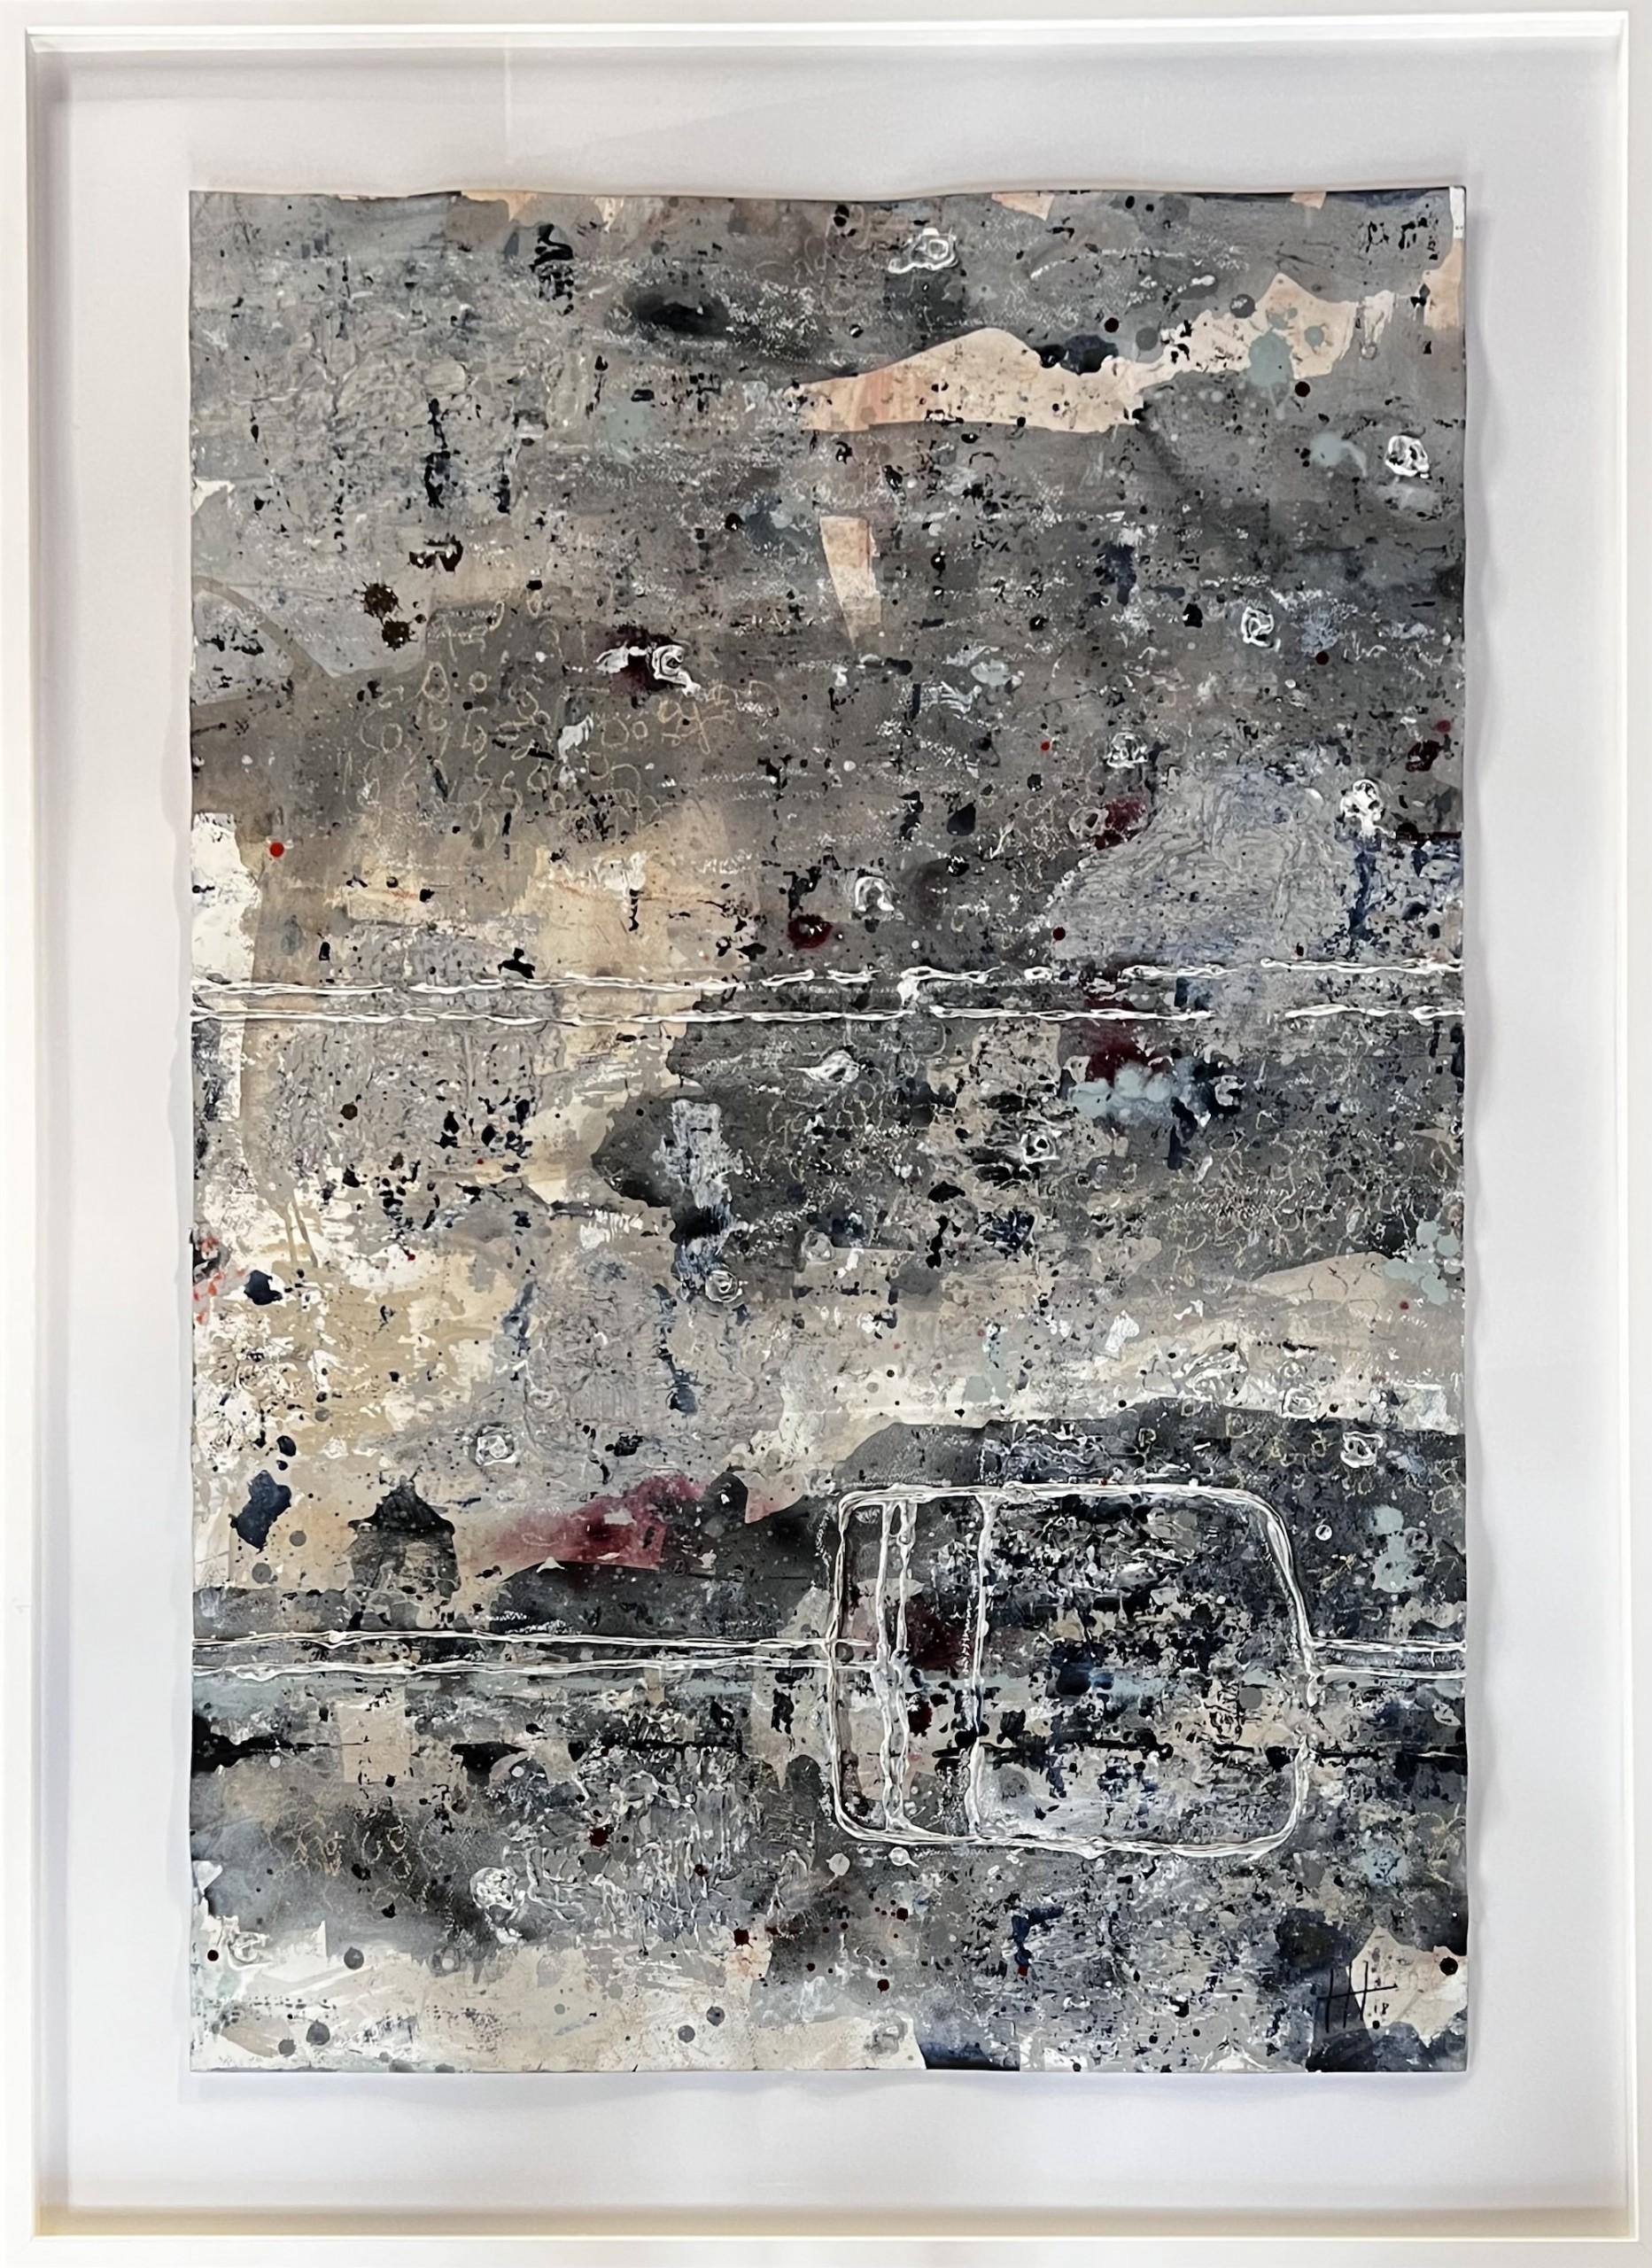 Crantock by Harriet Hoult [2021]

original
Mixed Media on paper
Image size: H:115 cm x W:78 cm
Complete Size of Unframed Work: H:115 cm x W:78 cm x D:0.1cm
Frame Size: H:138 cm x W:100.5 cm x D:3.5cm
Sold Framed
Please note that insitu images are